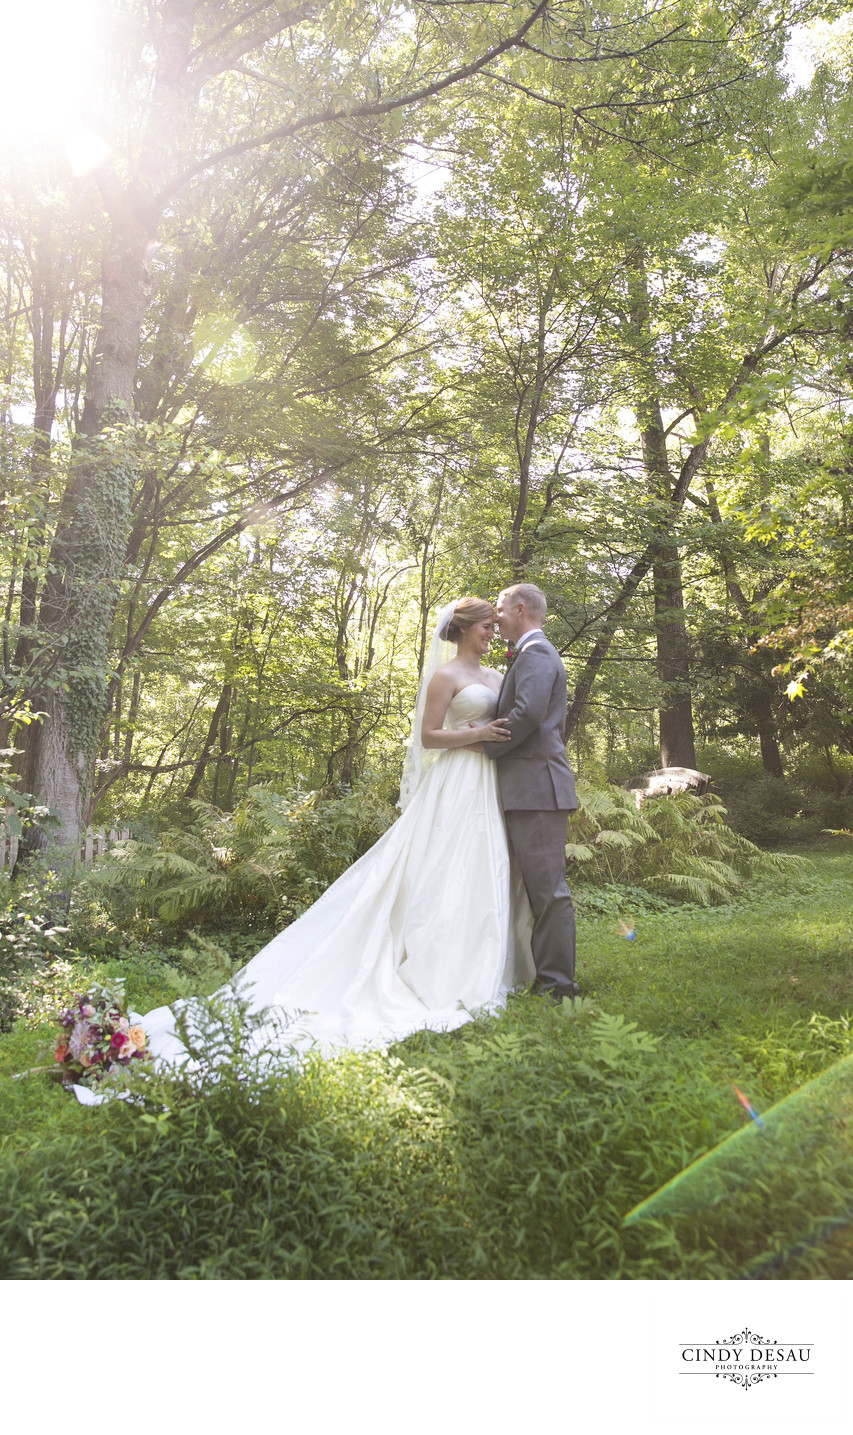 Bride and Groom Surrounded by Nature Photo